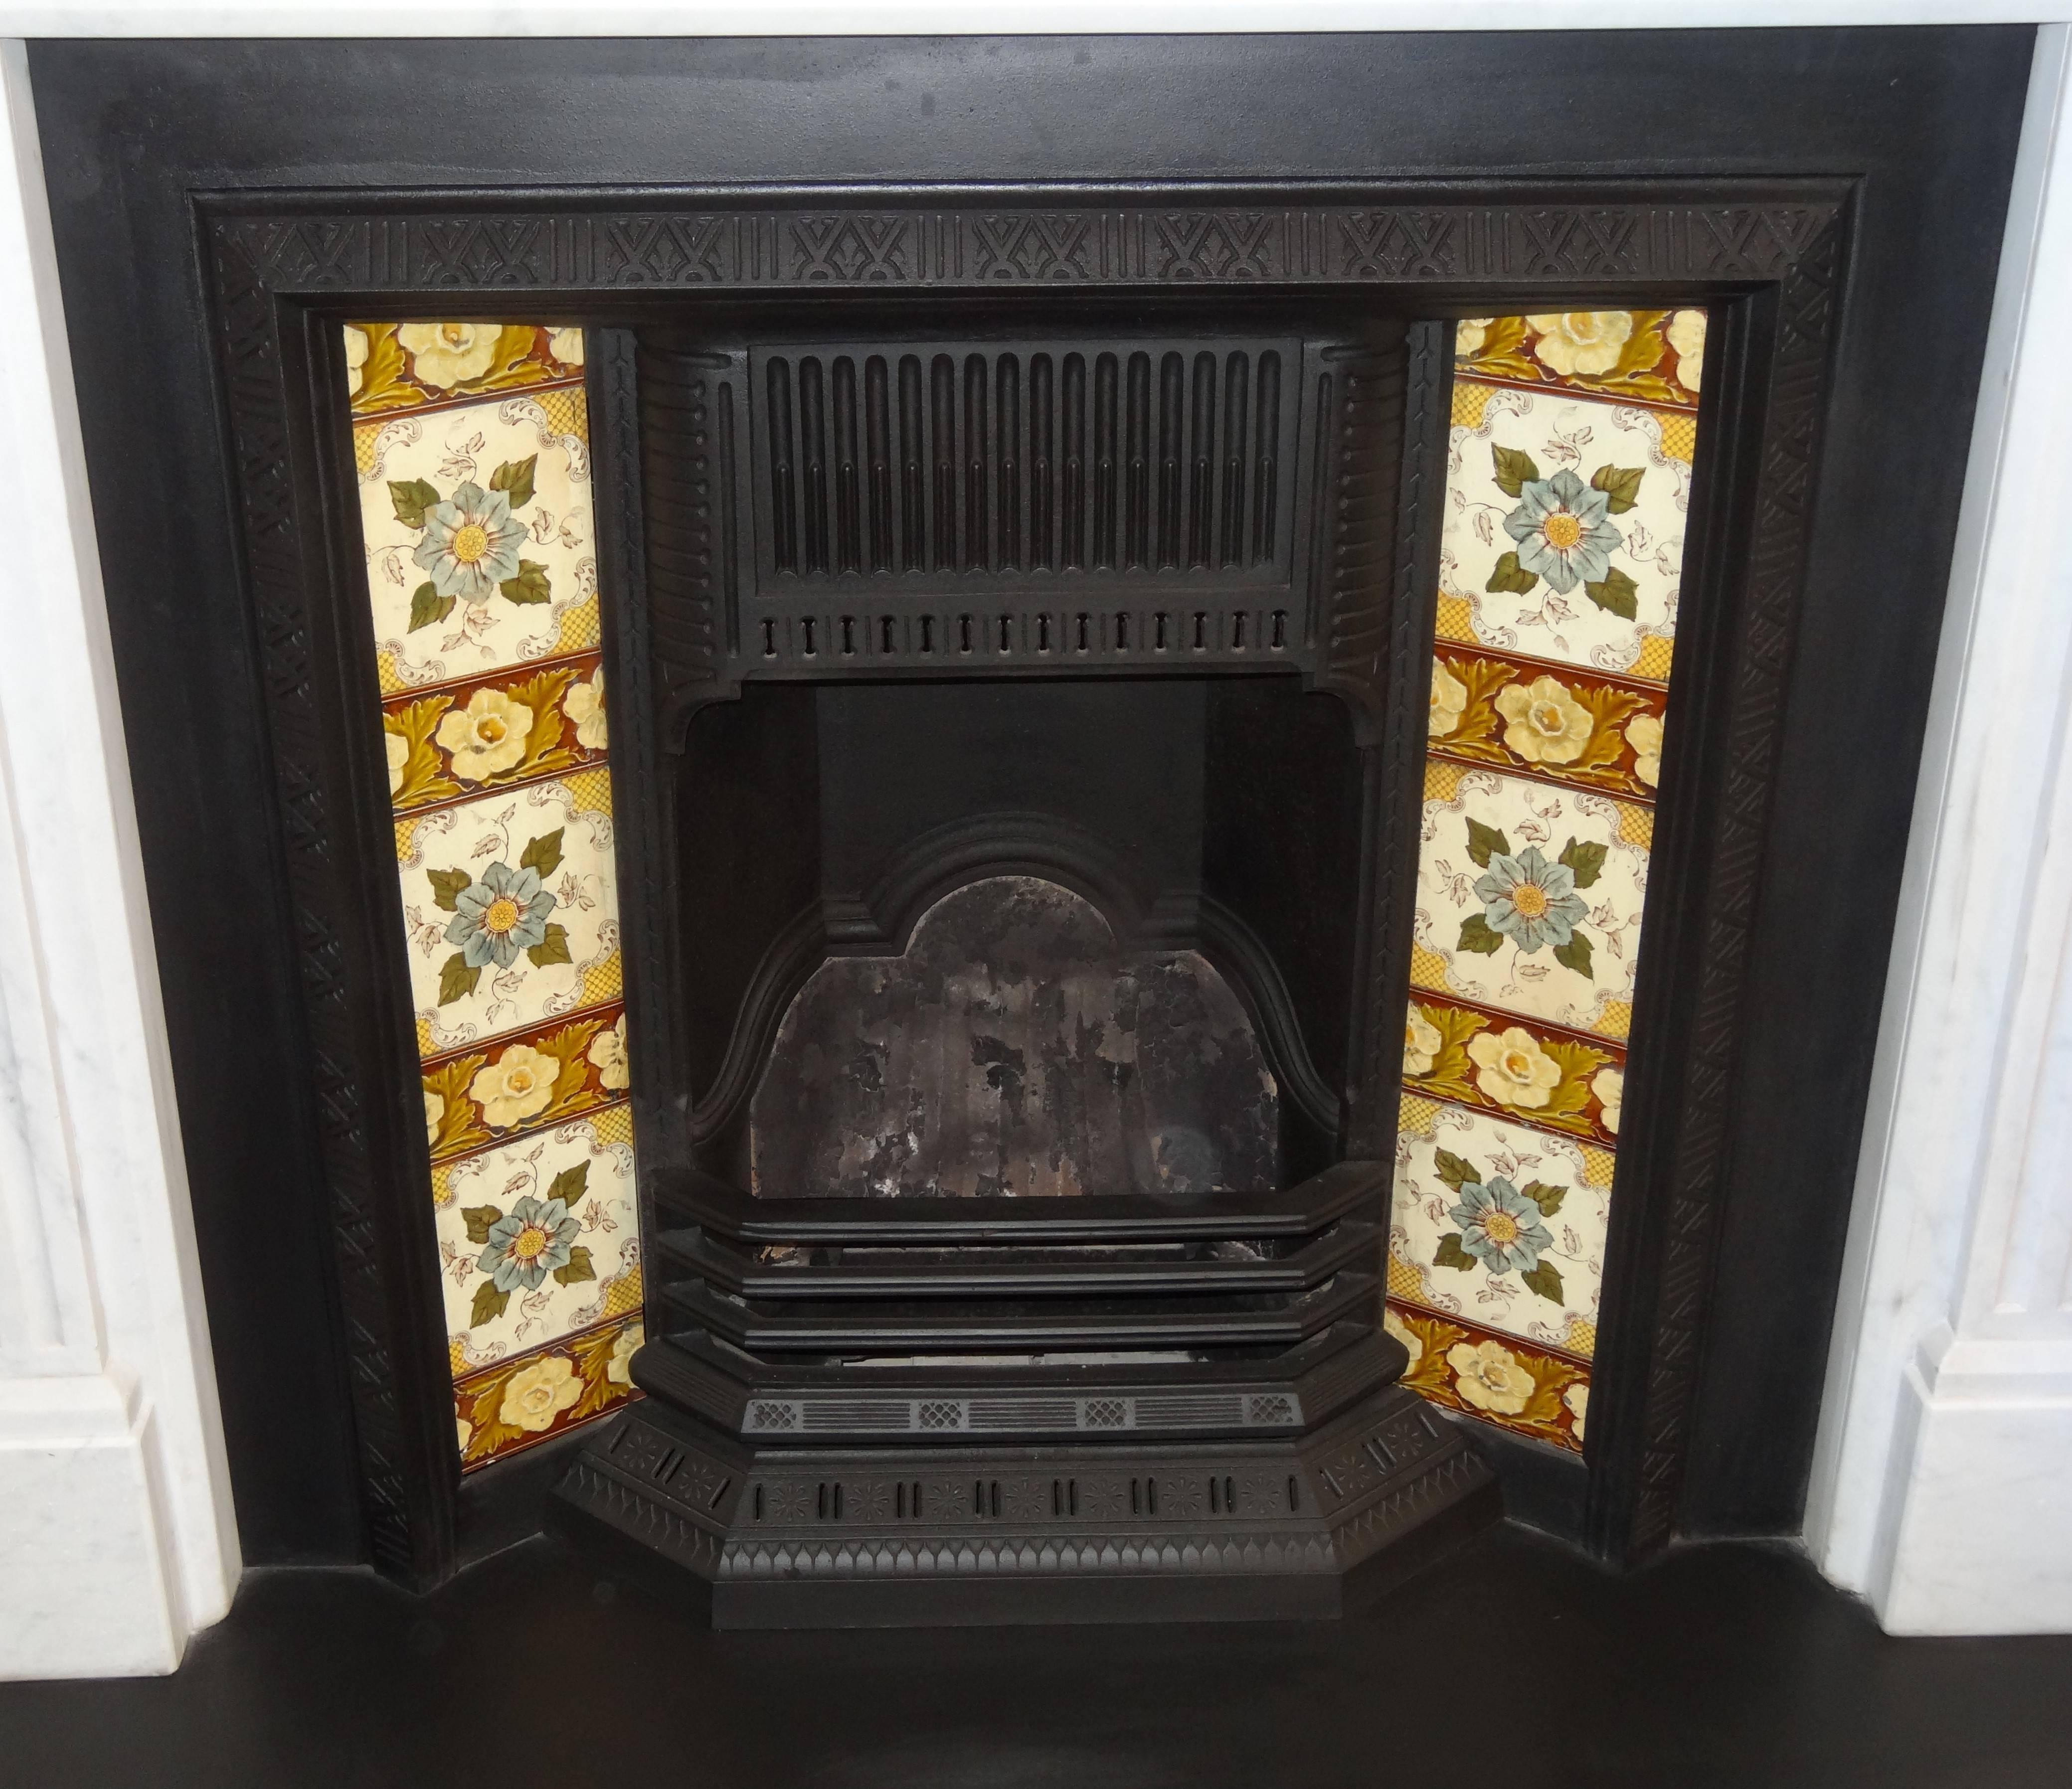 Reclaimed 19th century cast iron fireplace insert grate with antique tiles.